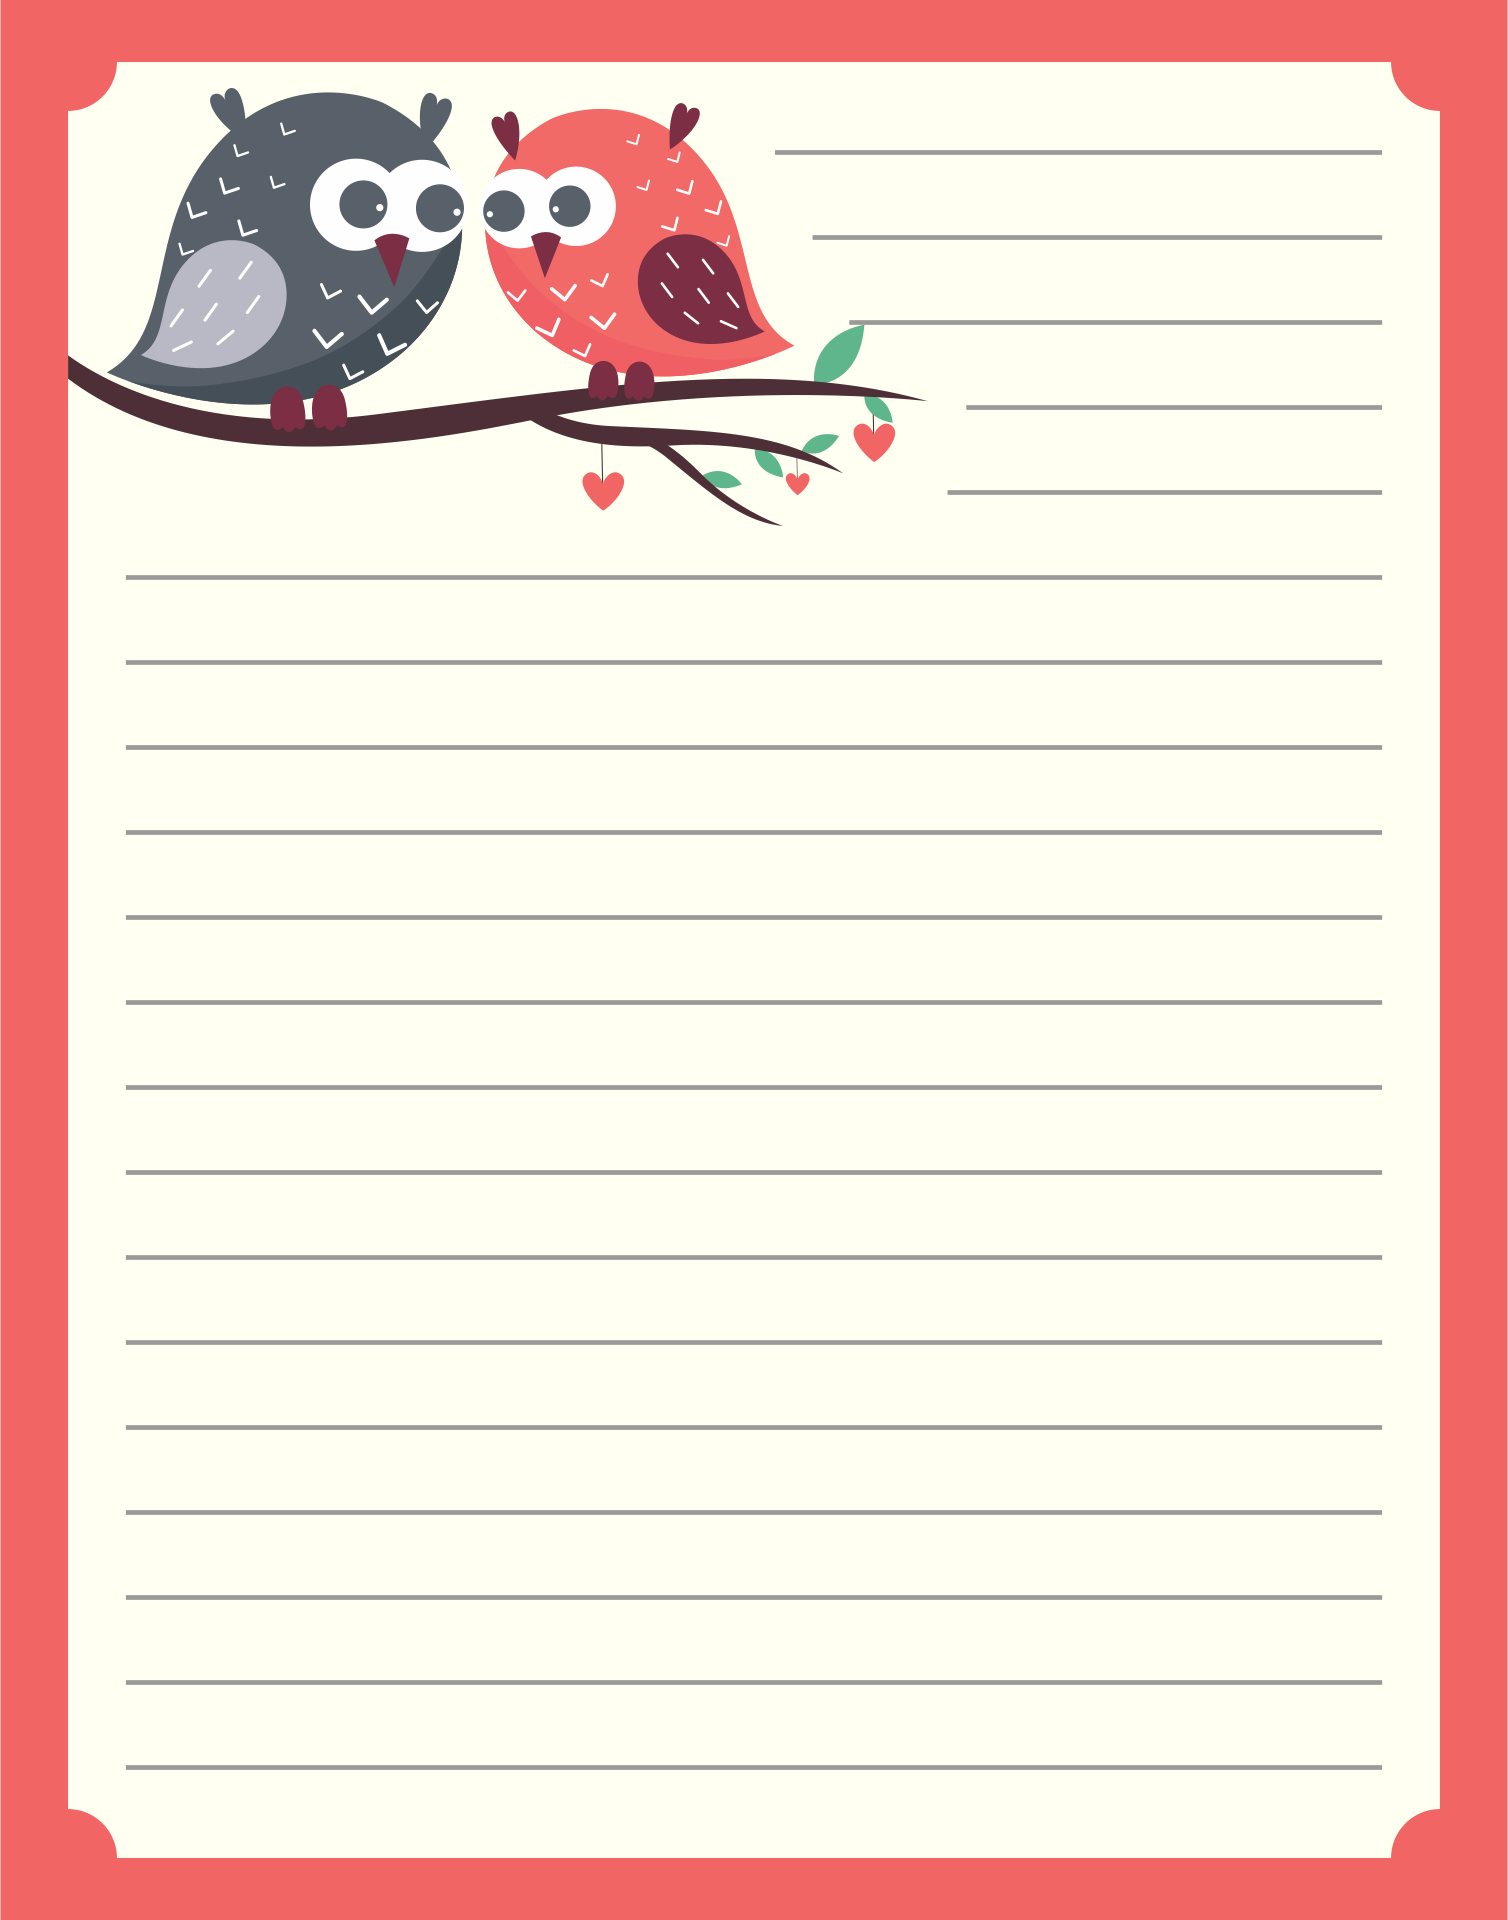 8 Best Images of Cute Owls Love Letter Stationery Printable - Free ...